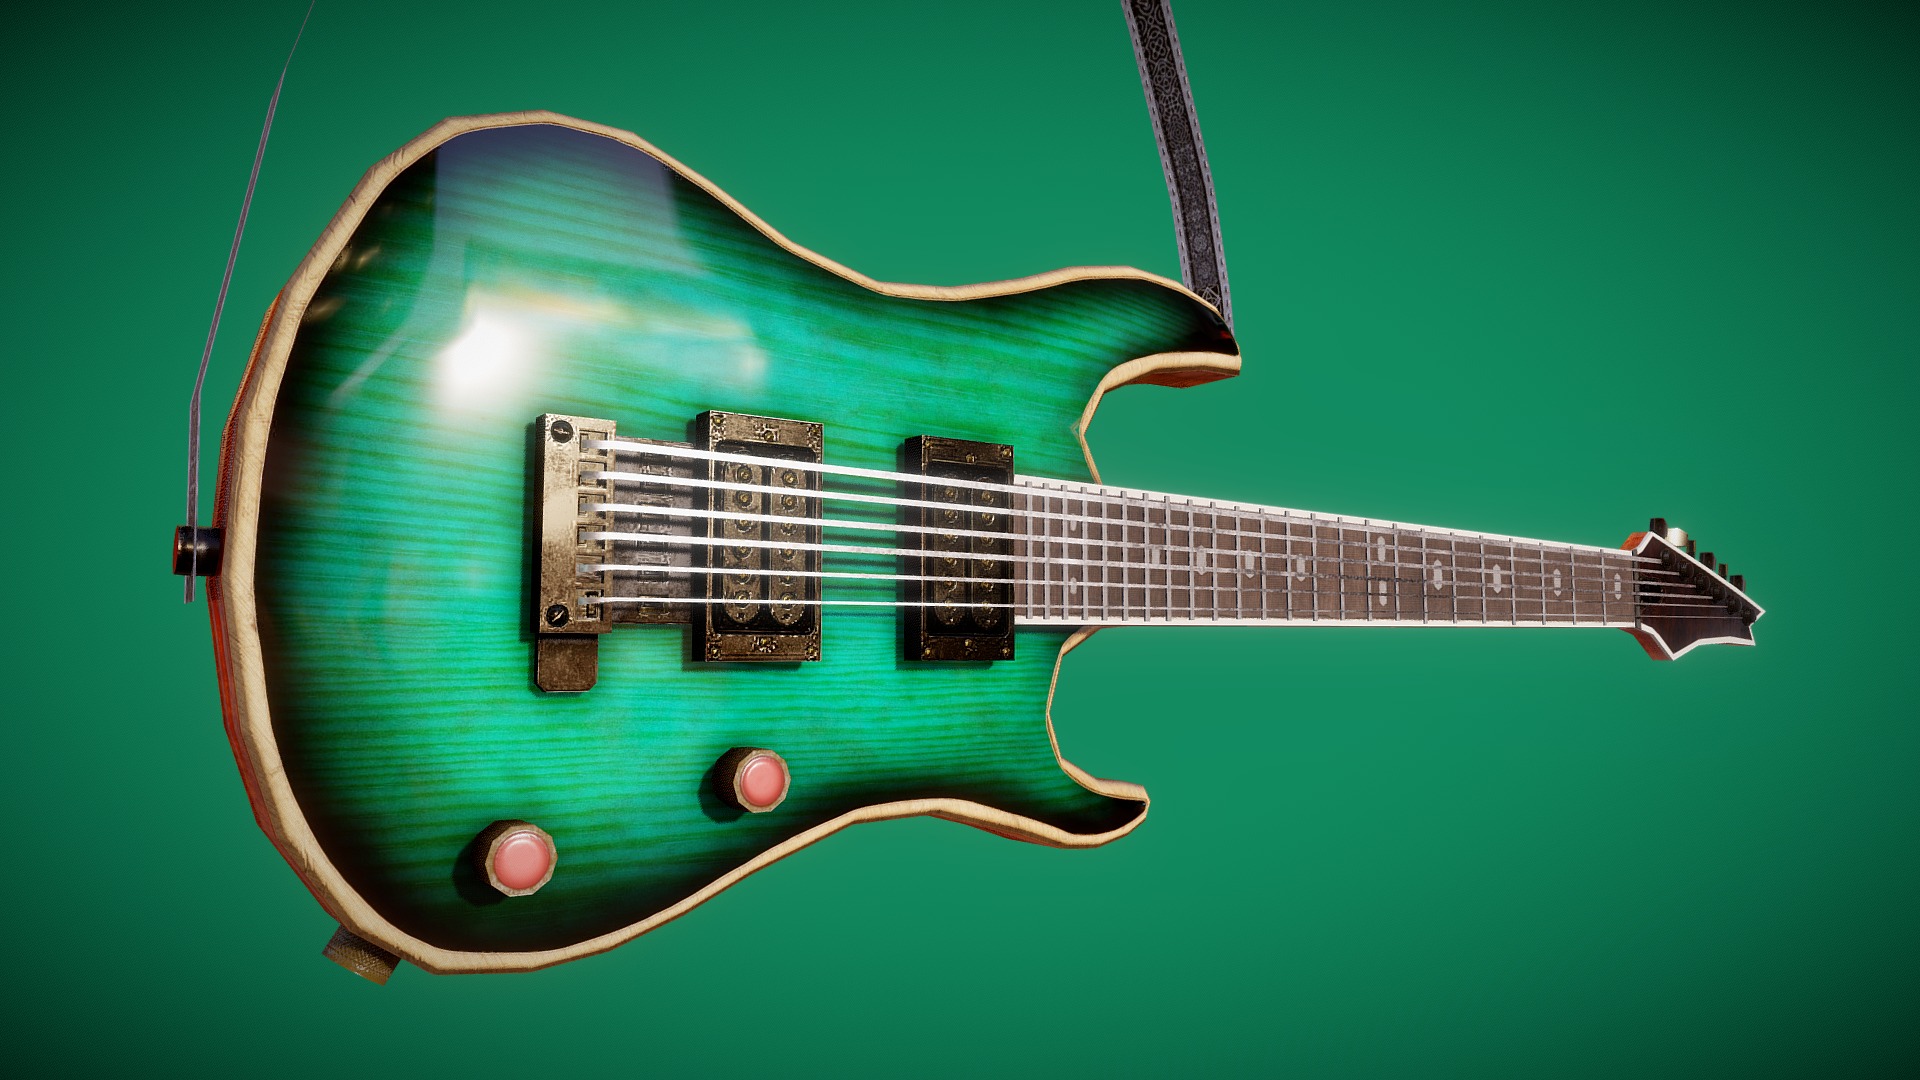 3D model Guitar - This is a 3D model of the Guitar. The 3D model is about a guitar on a green background.